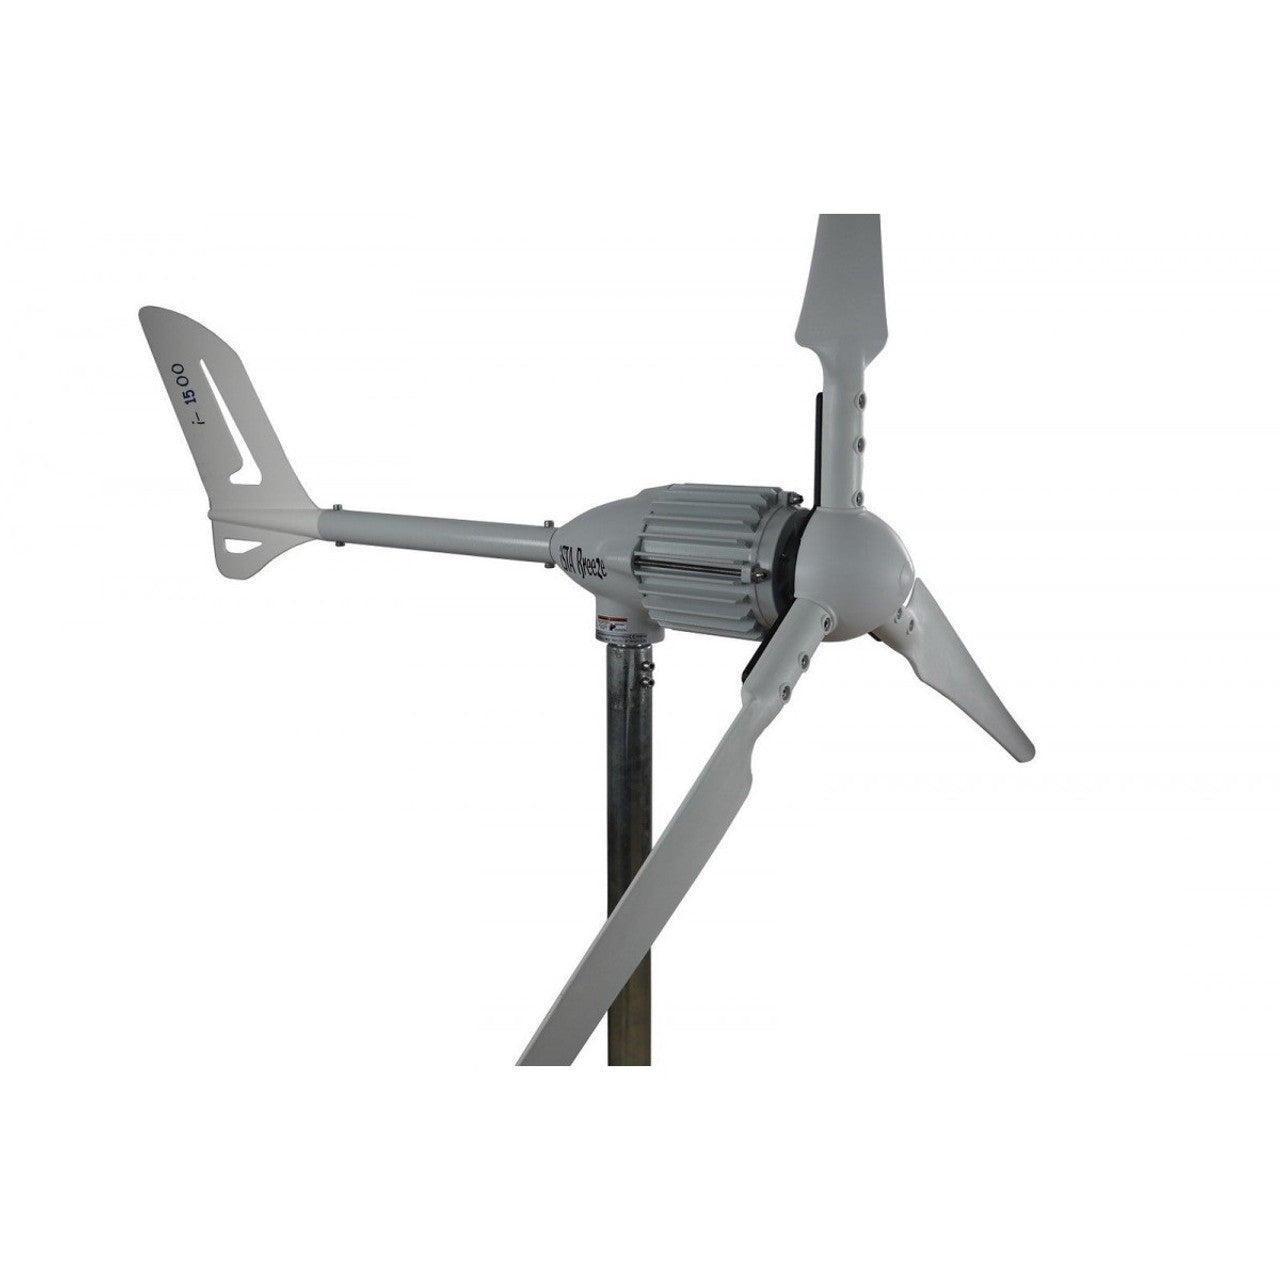 Kit i-1500W 24V Wind Turbine Wind Generator & Charge Controller (for Lithium Battery) & Tower